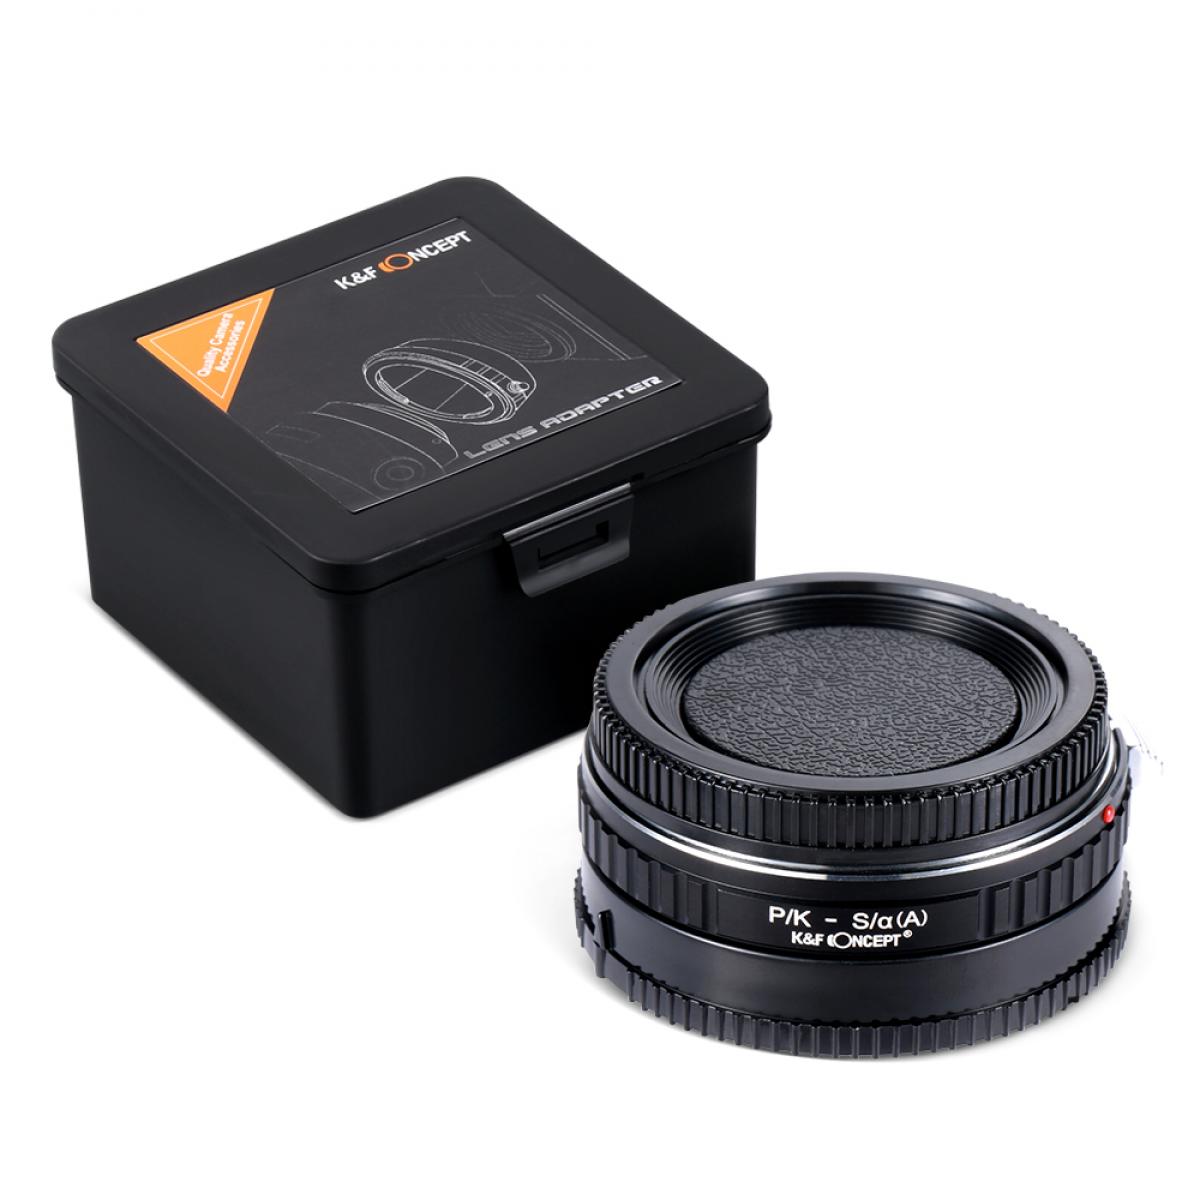 Pentax K Lenses to Sony A Lens Mount Adapter K&F Concept M42271 Lens Adapter